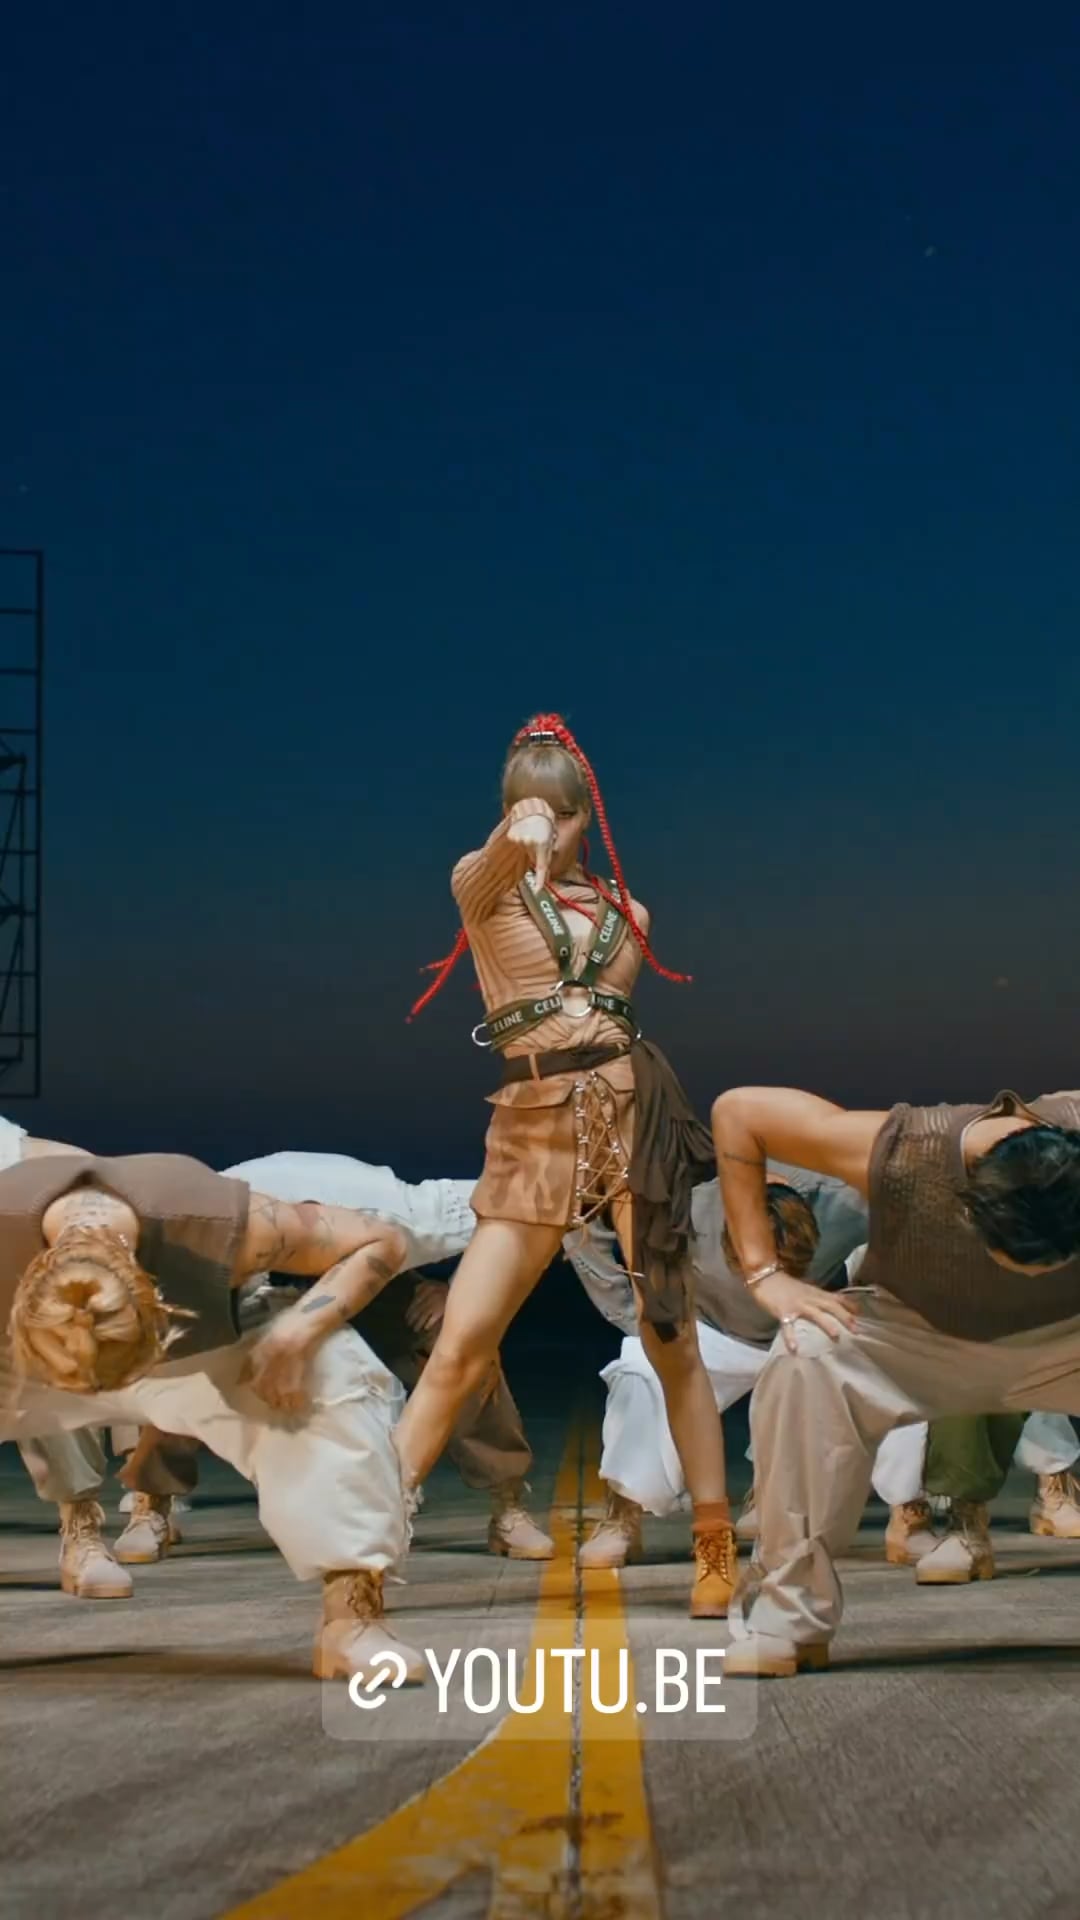 230919 LISA - ‘MONEY’ EXCLUSIVE PERFORMANCE VIDEO hits 900 MILLION VIEWS on Youtube!